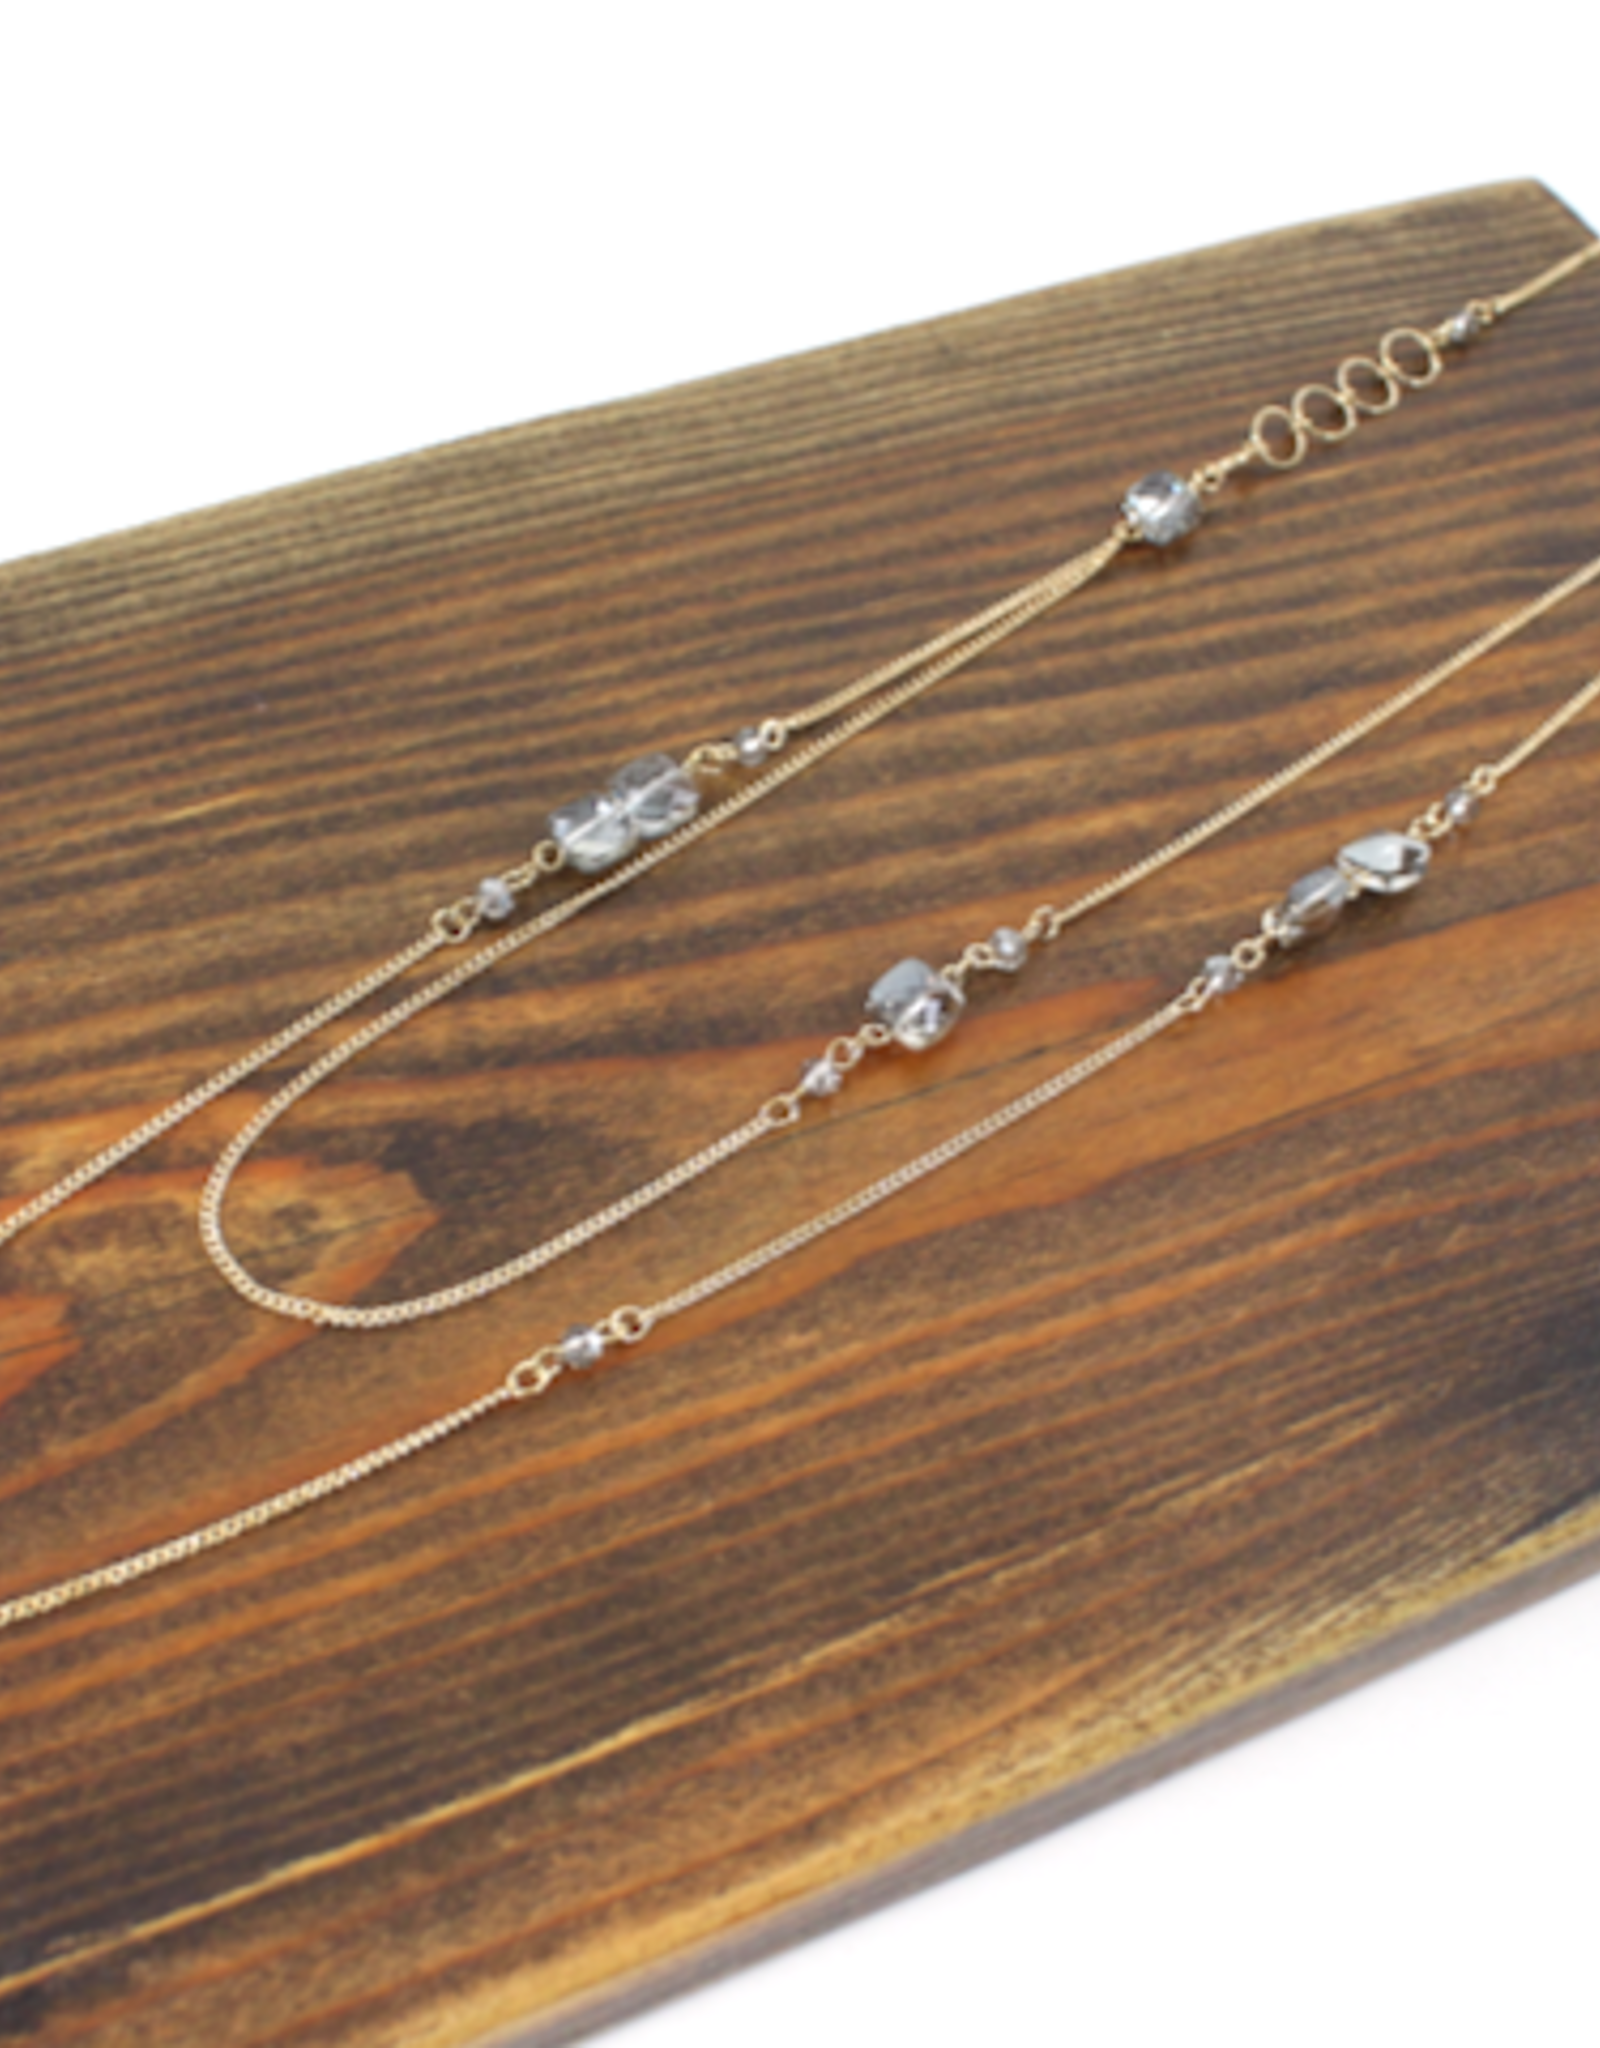 Gold Metal Alloy Long Chain w/Clear Crystals Necklace